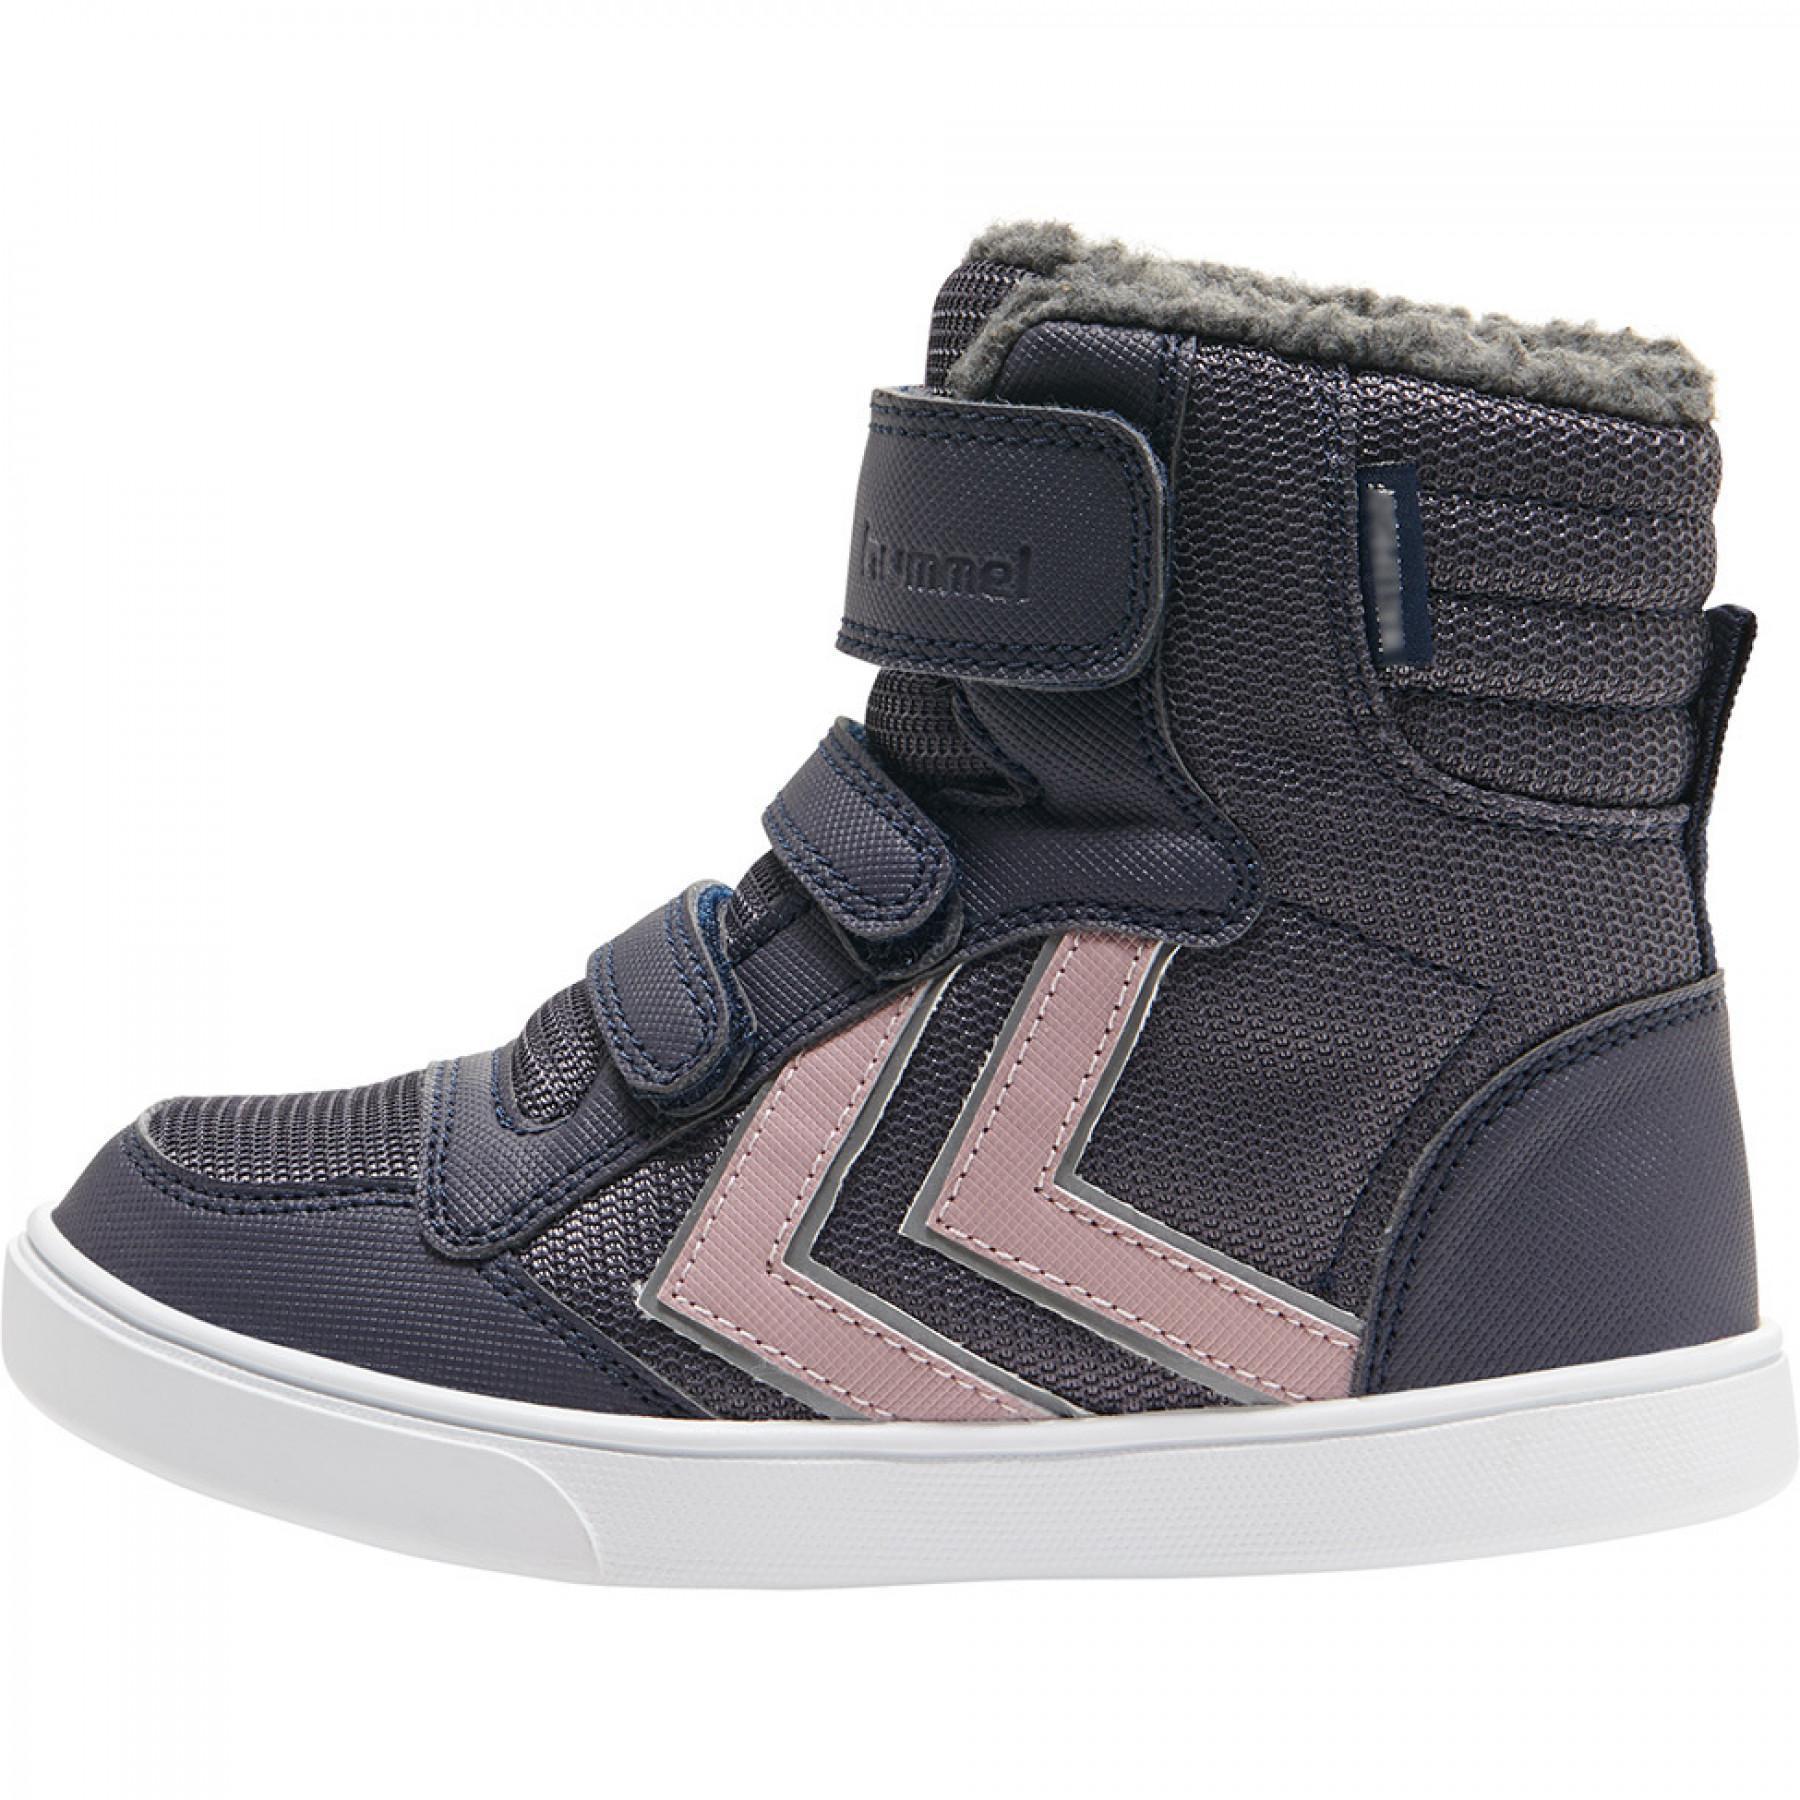 Children's sneakers Hummel stadil poly boot mid